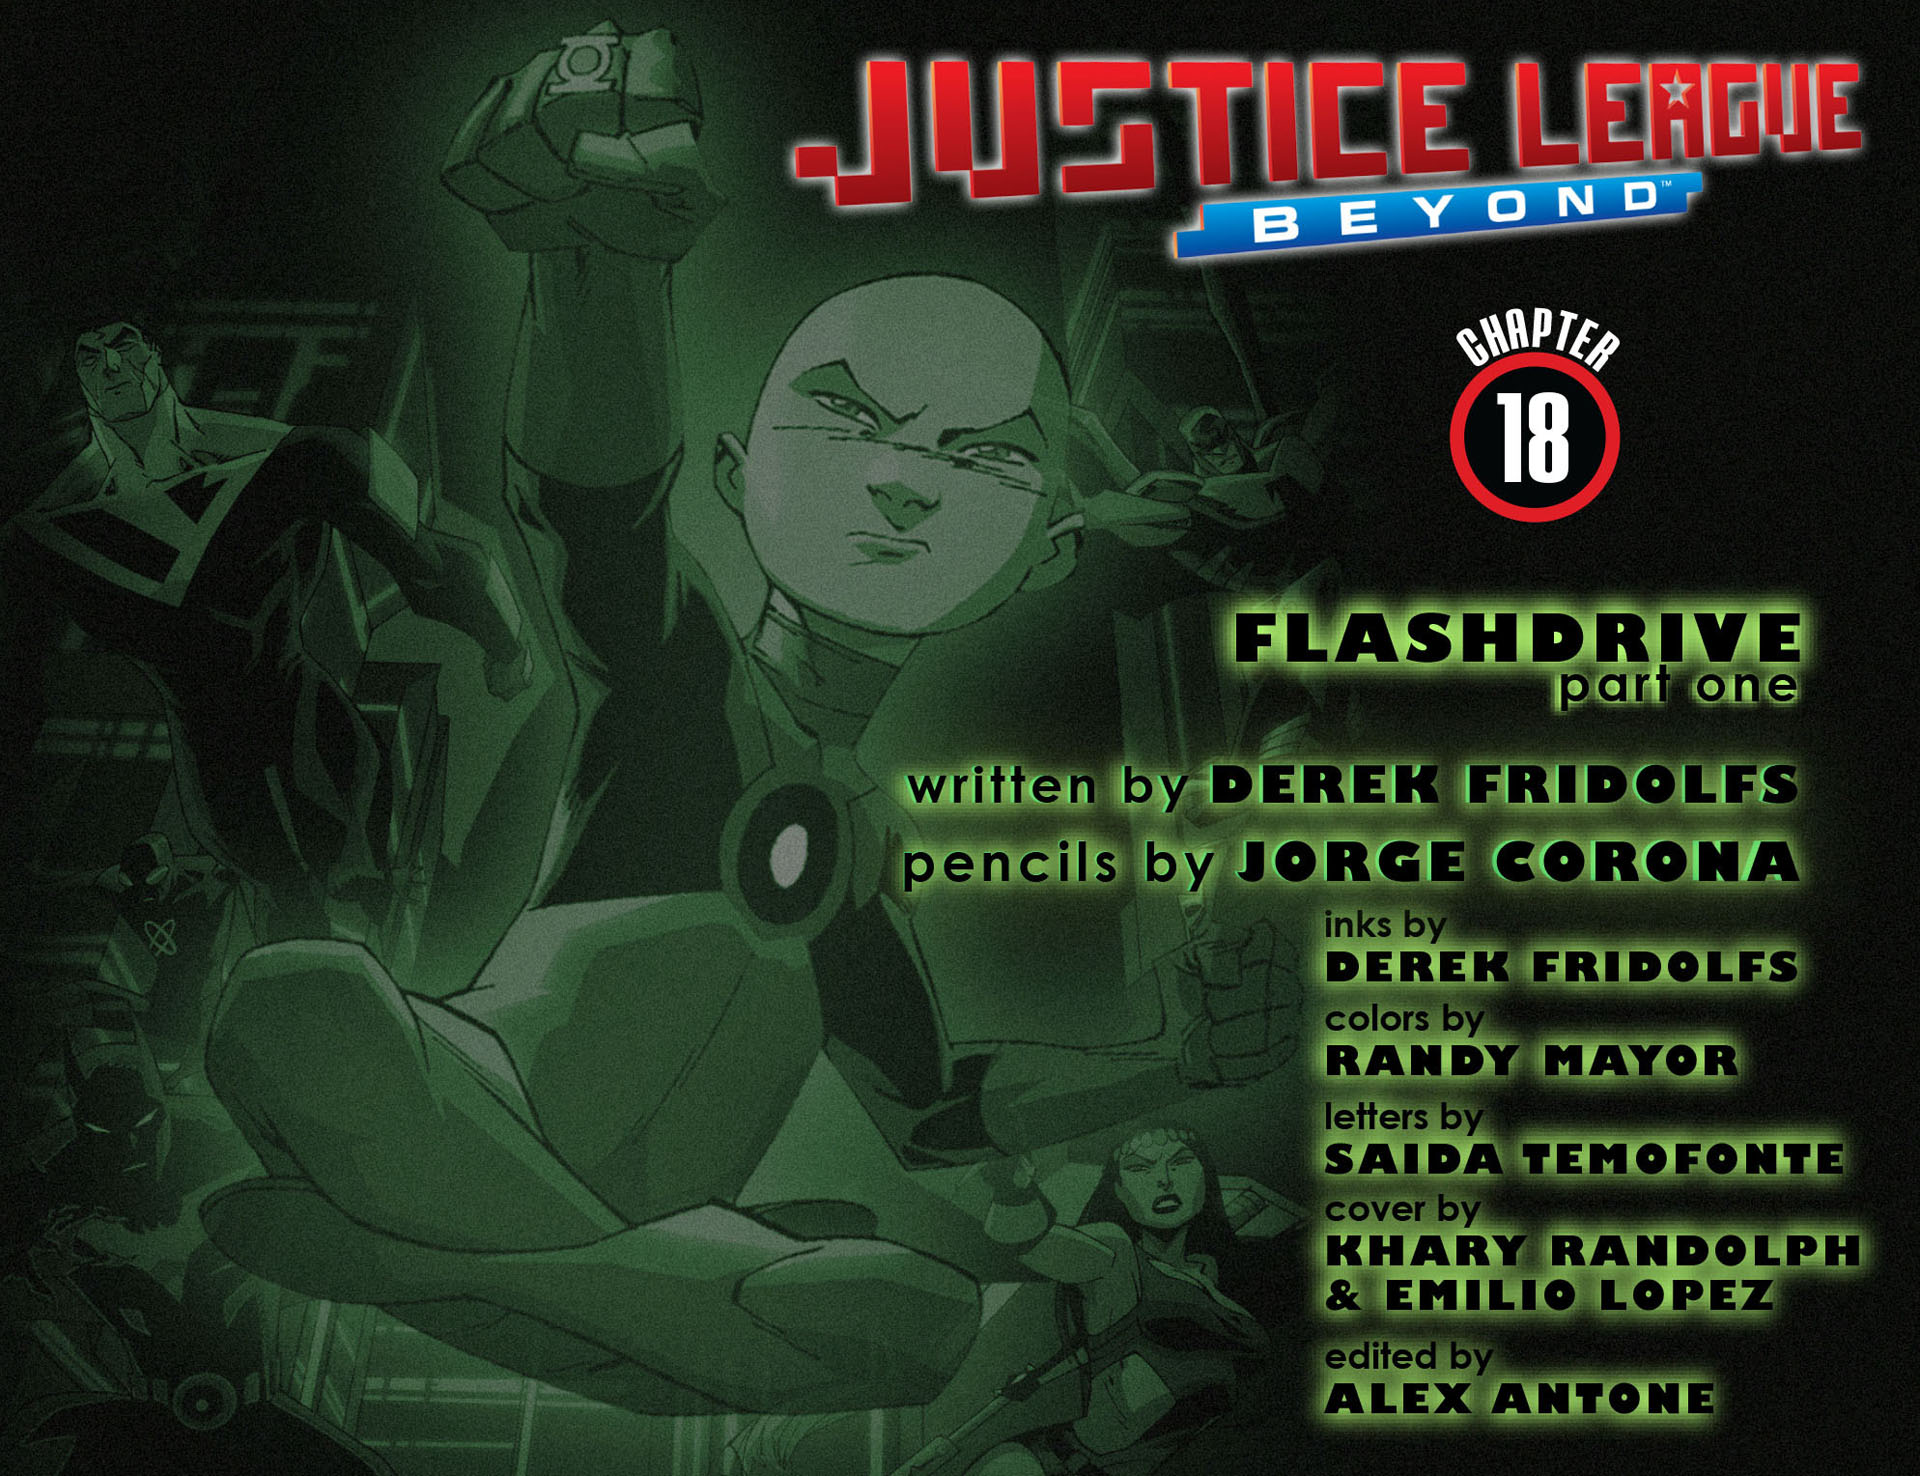 Read online Justice League Beyond comic -  Issue #18 - 2